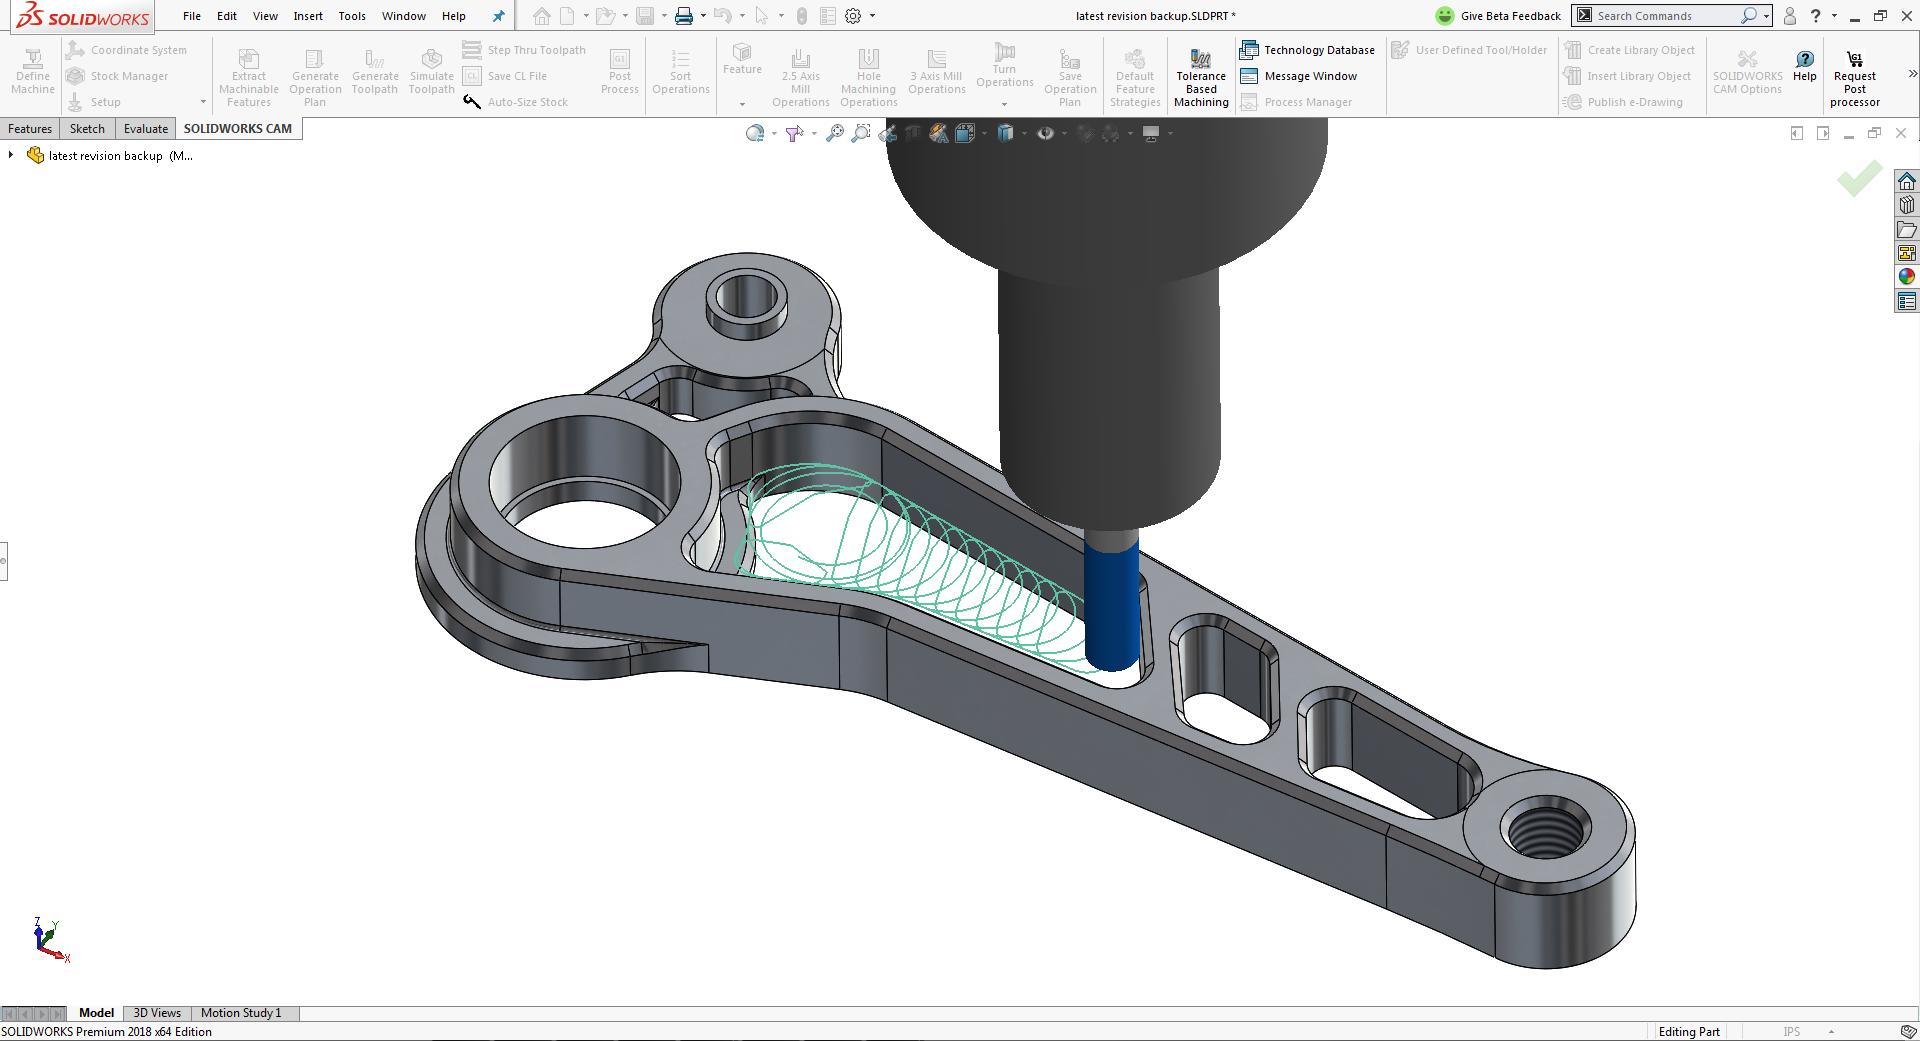 solidworks android free download